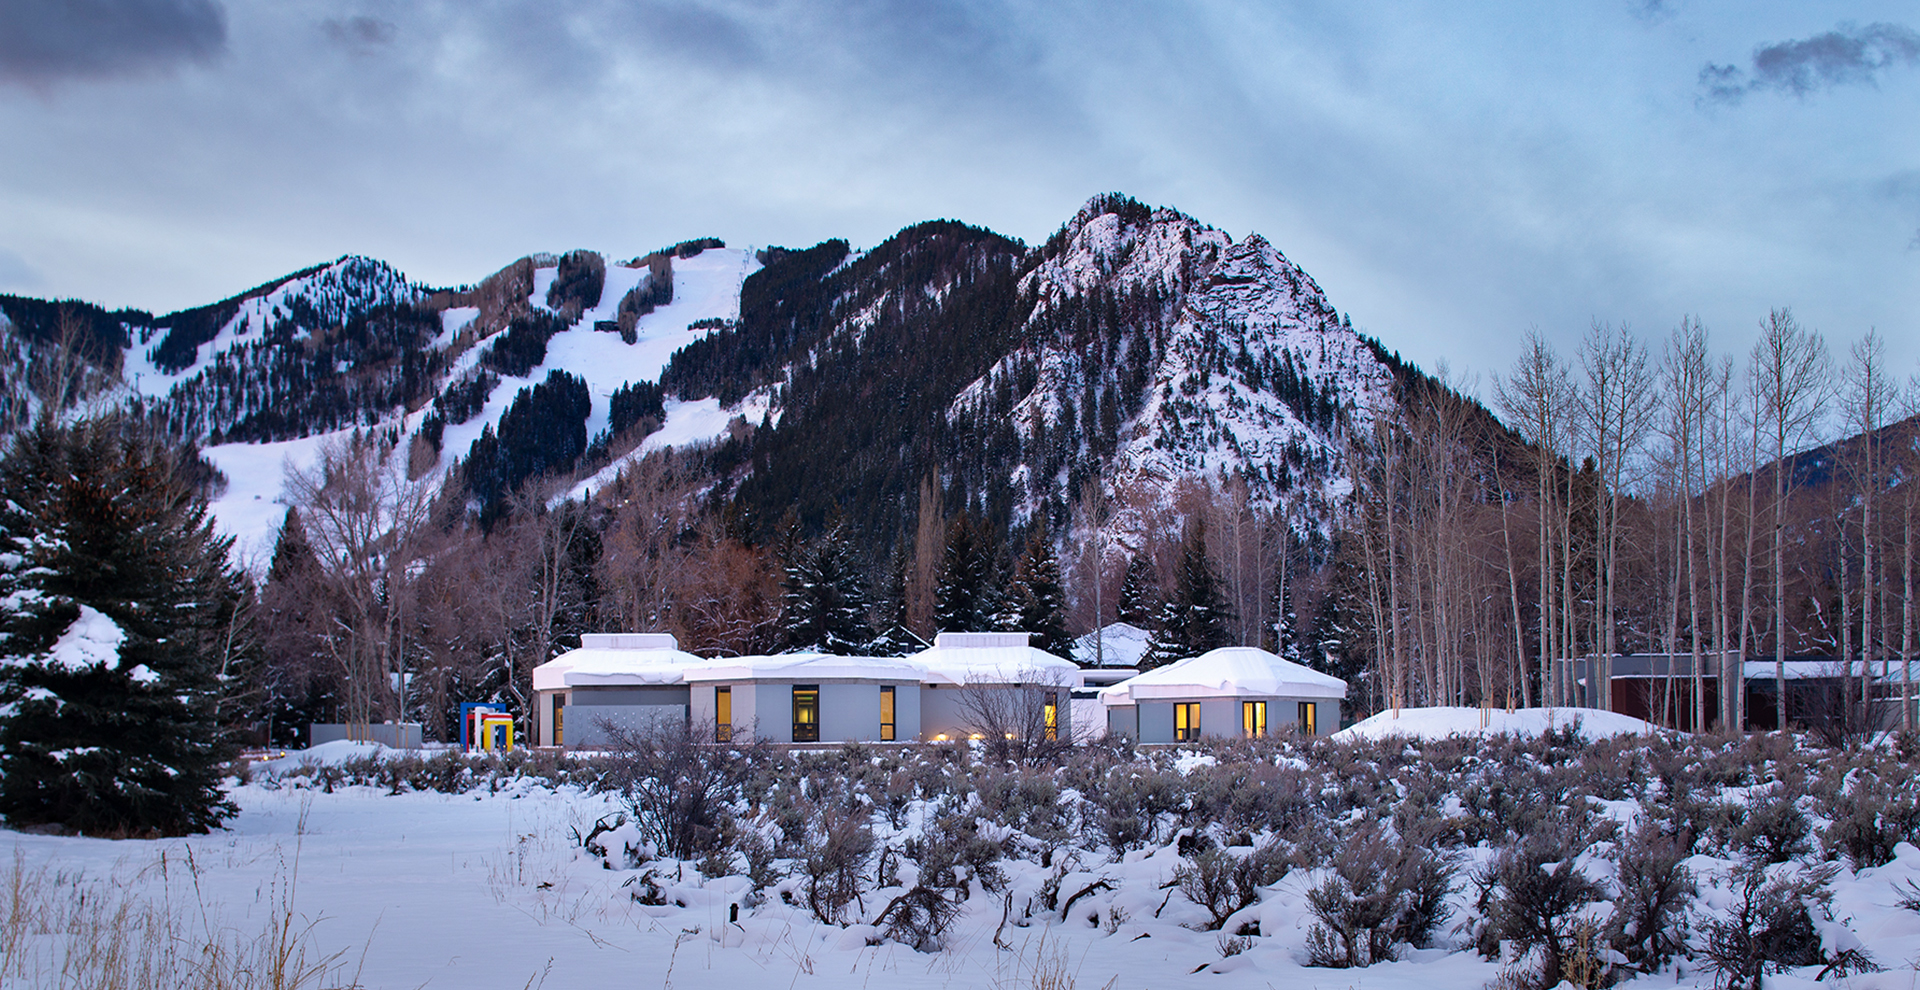 Aspen Meadows for Hotels & Resorts